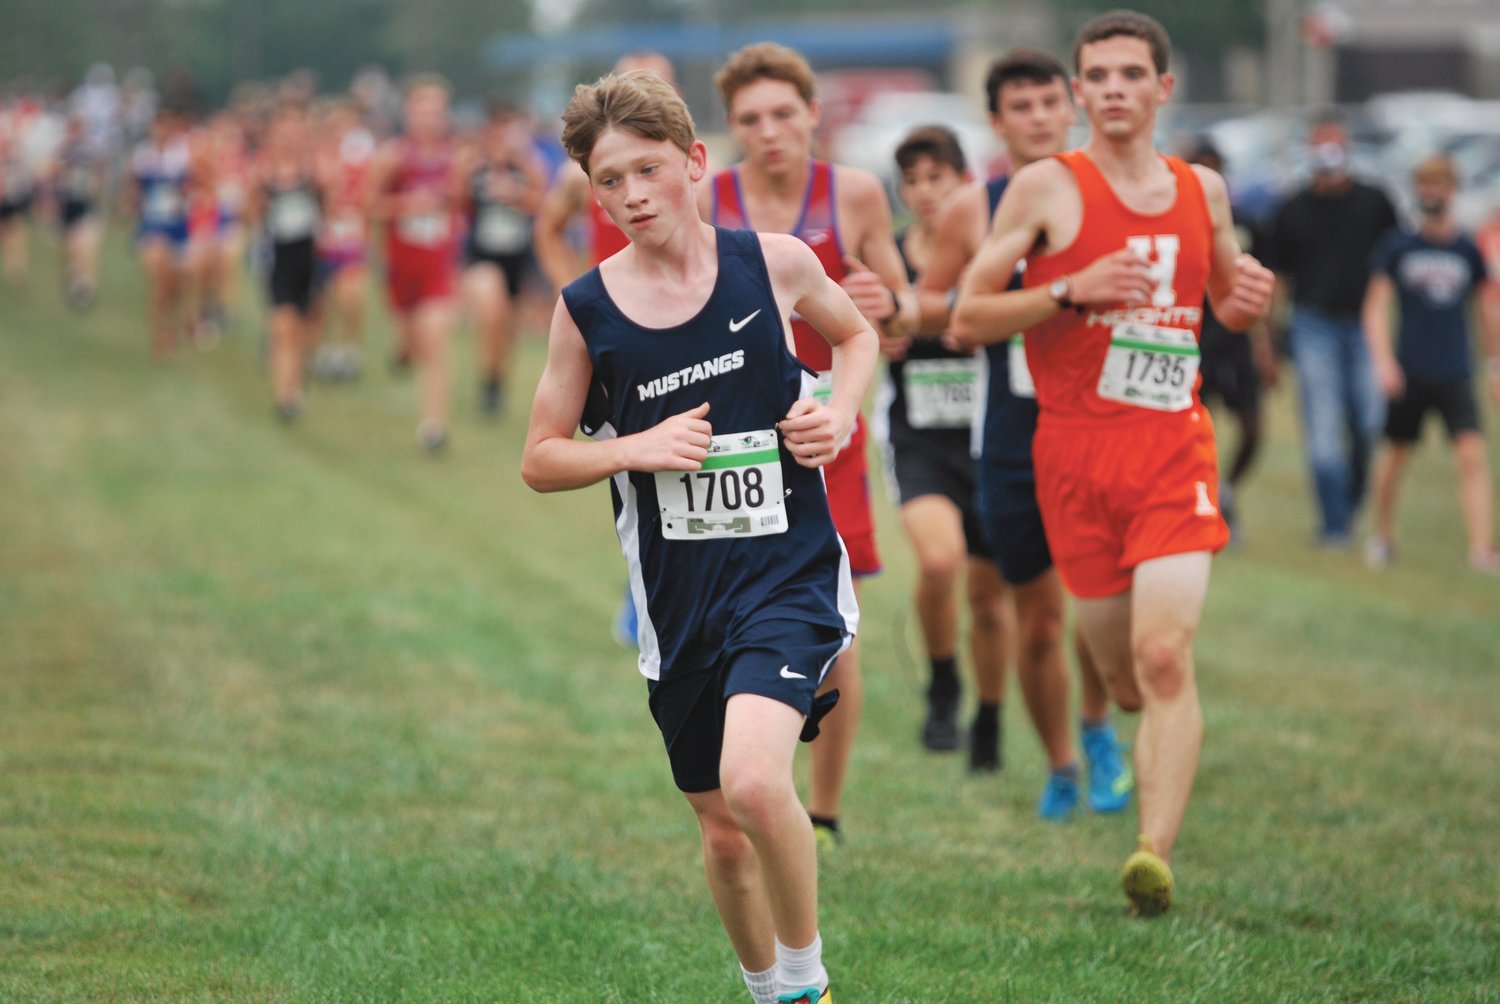 Hayden Klerr placed 37th in a time of 19:58 for Fountain Central on Thursday at the Charger Classic.